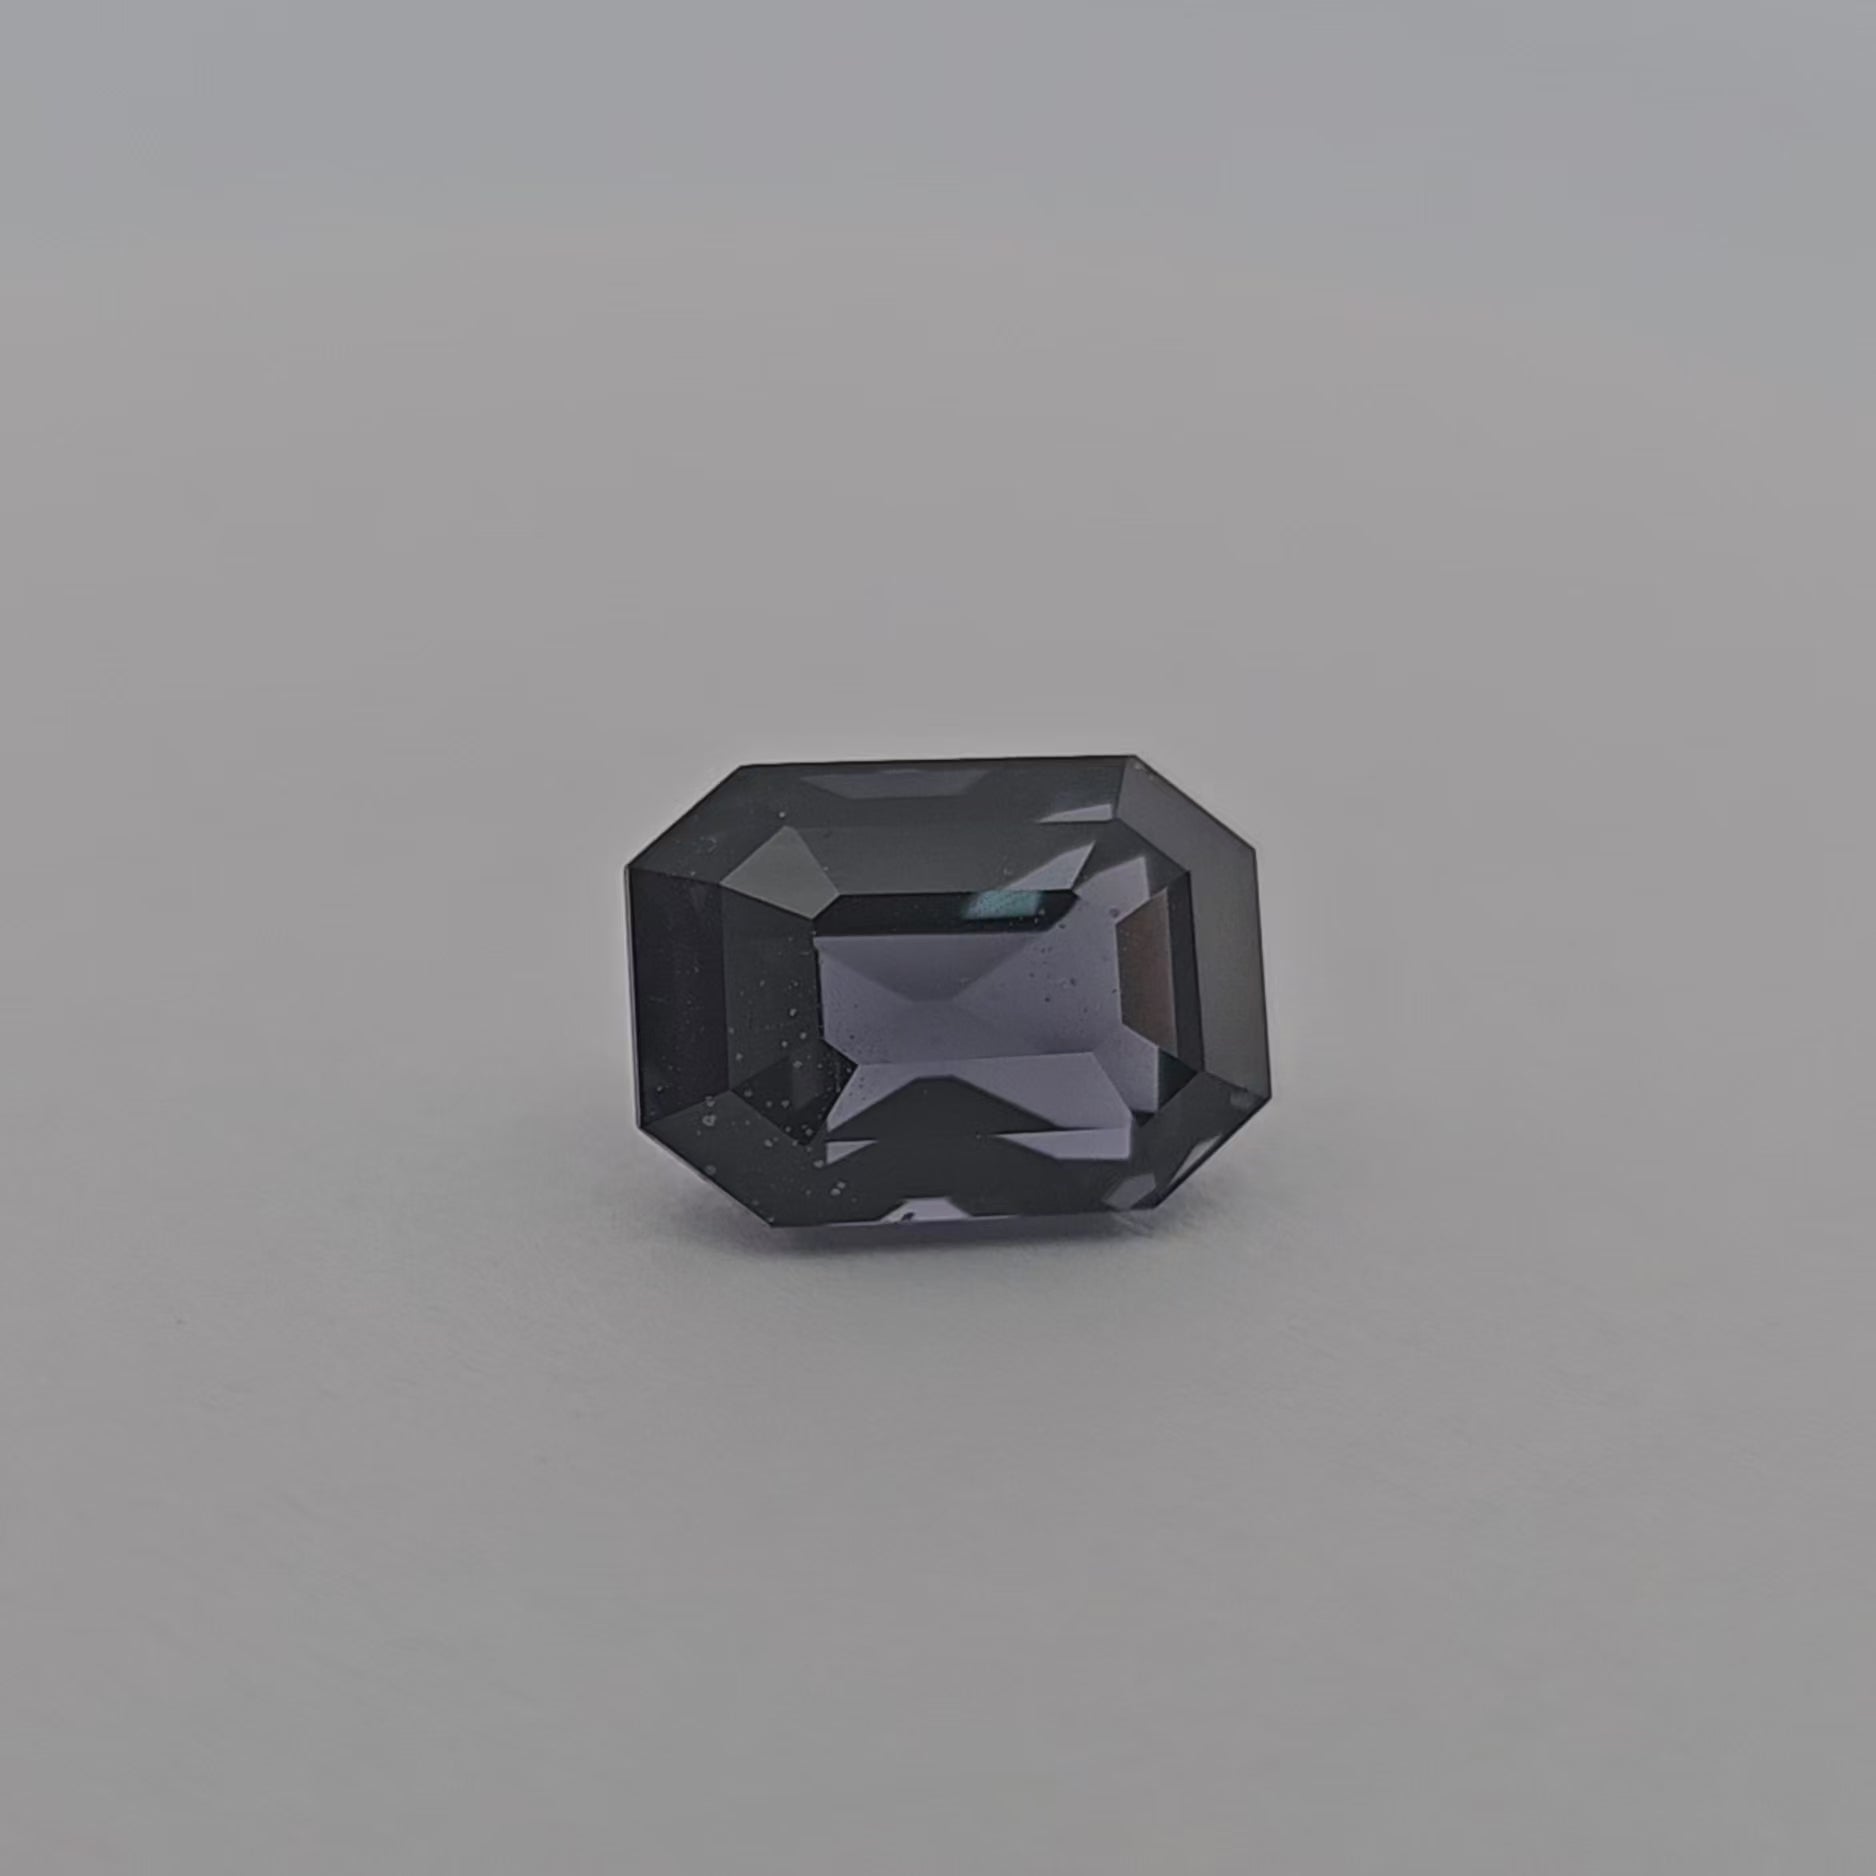 loose Natural Blue Spinel Stone 6.10 Carats Emerald Cut (11.7 x 8.4 mm) 